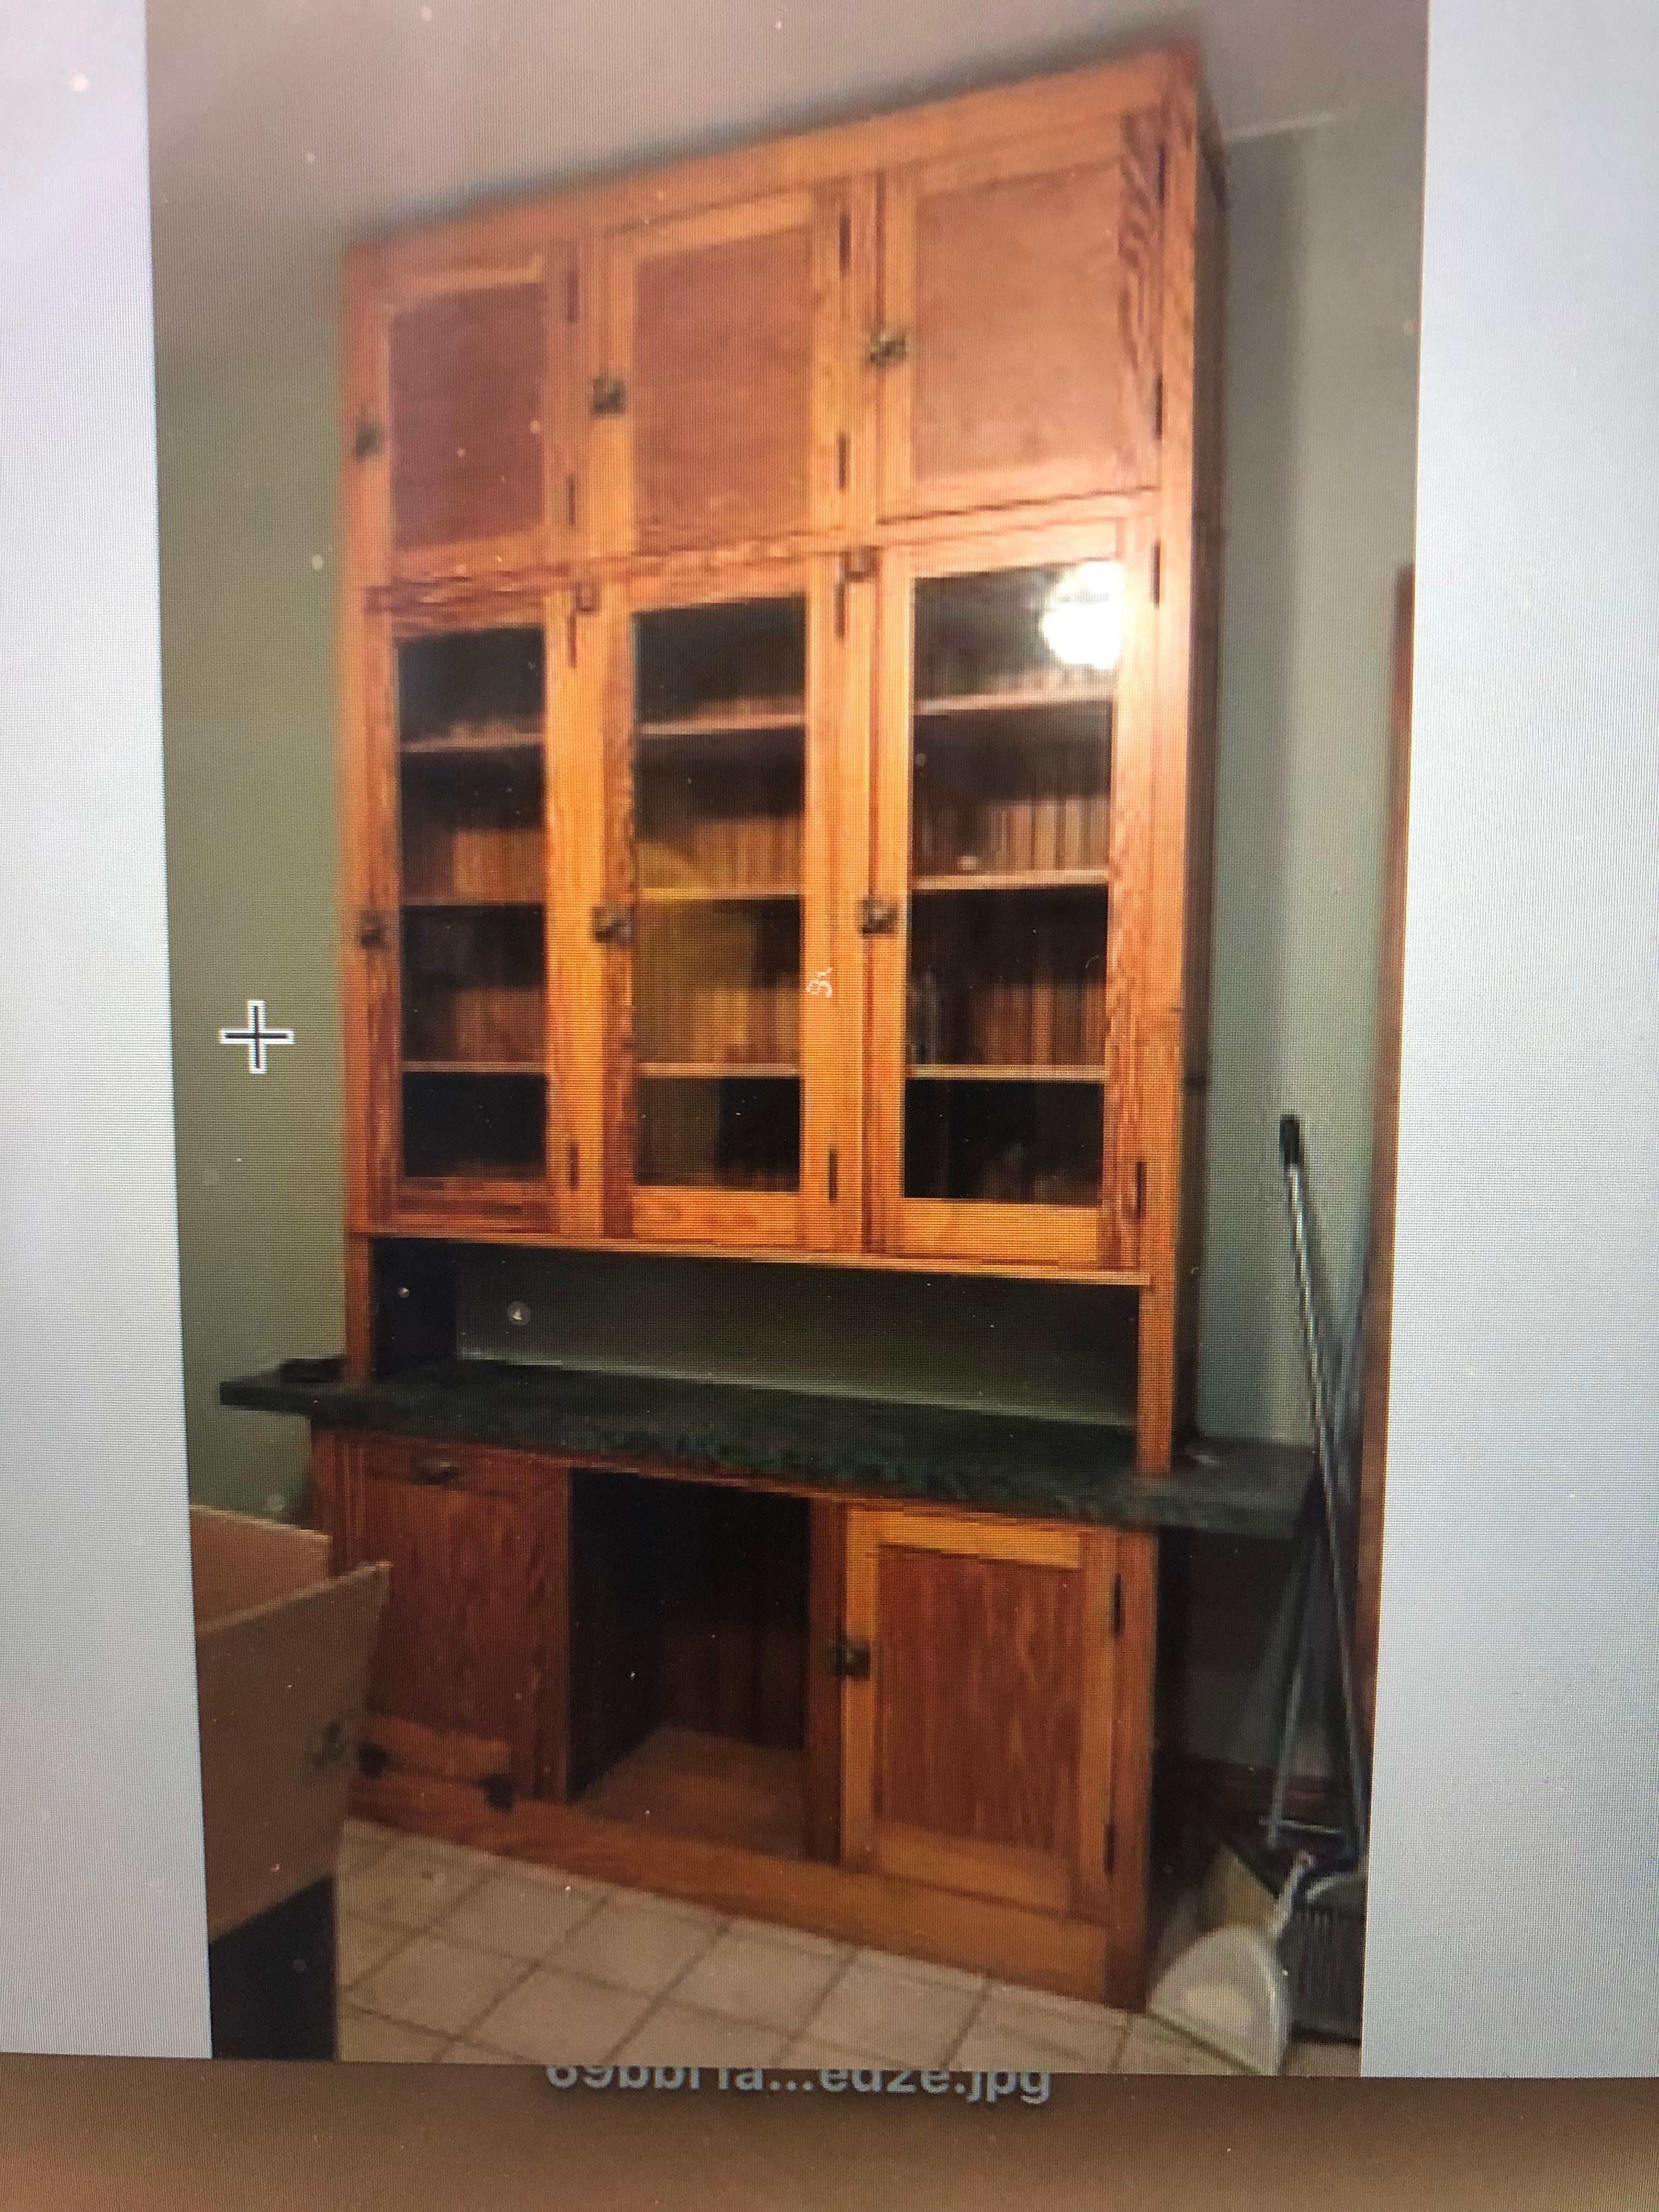 Storage cabinet of pine and glass cabinet with brass hardware from historic Chicago Pullman District home. Linoleum counter, circa 1920s. Two-piece unit, final height is a dramatic 106 inches. Large pull-out galvanized drawer for sugar, flour, etc.